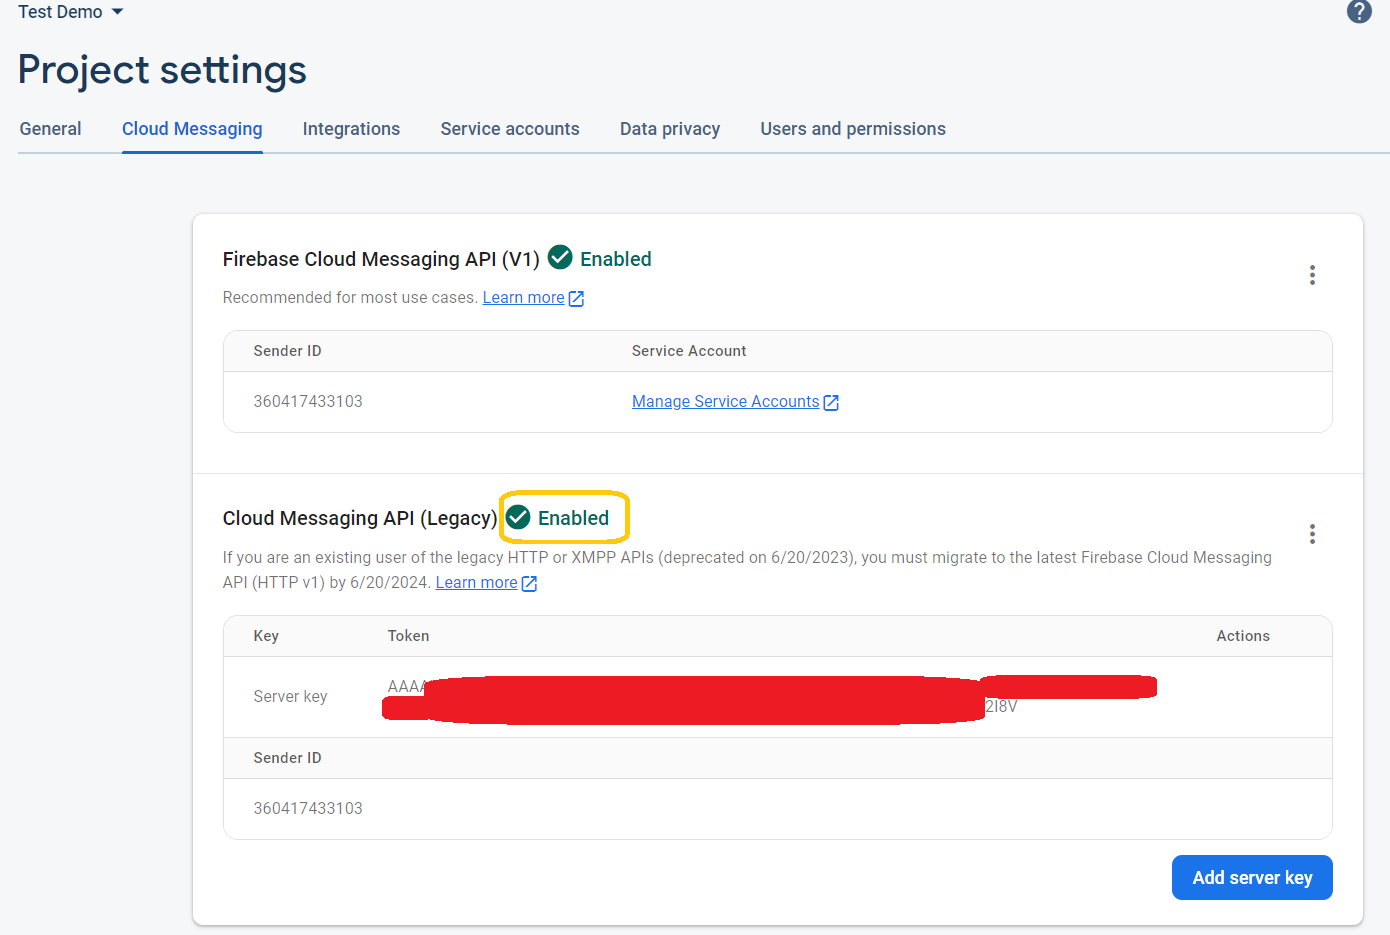 Verifying that Google Cloud Messaging is enabled